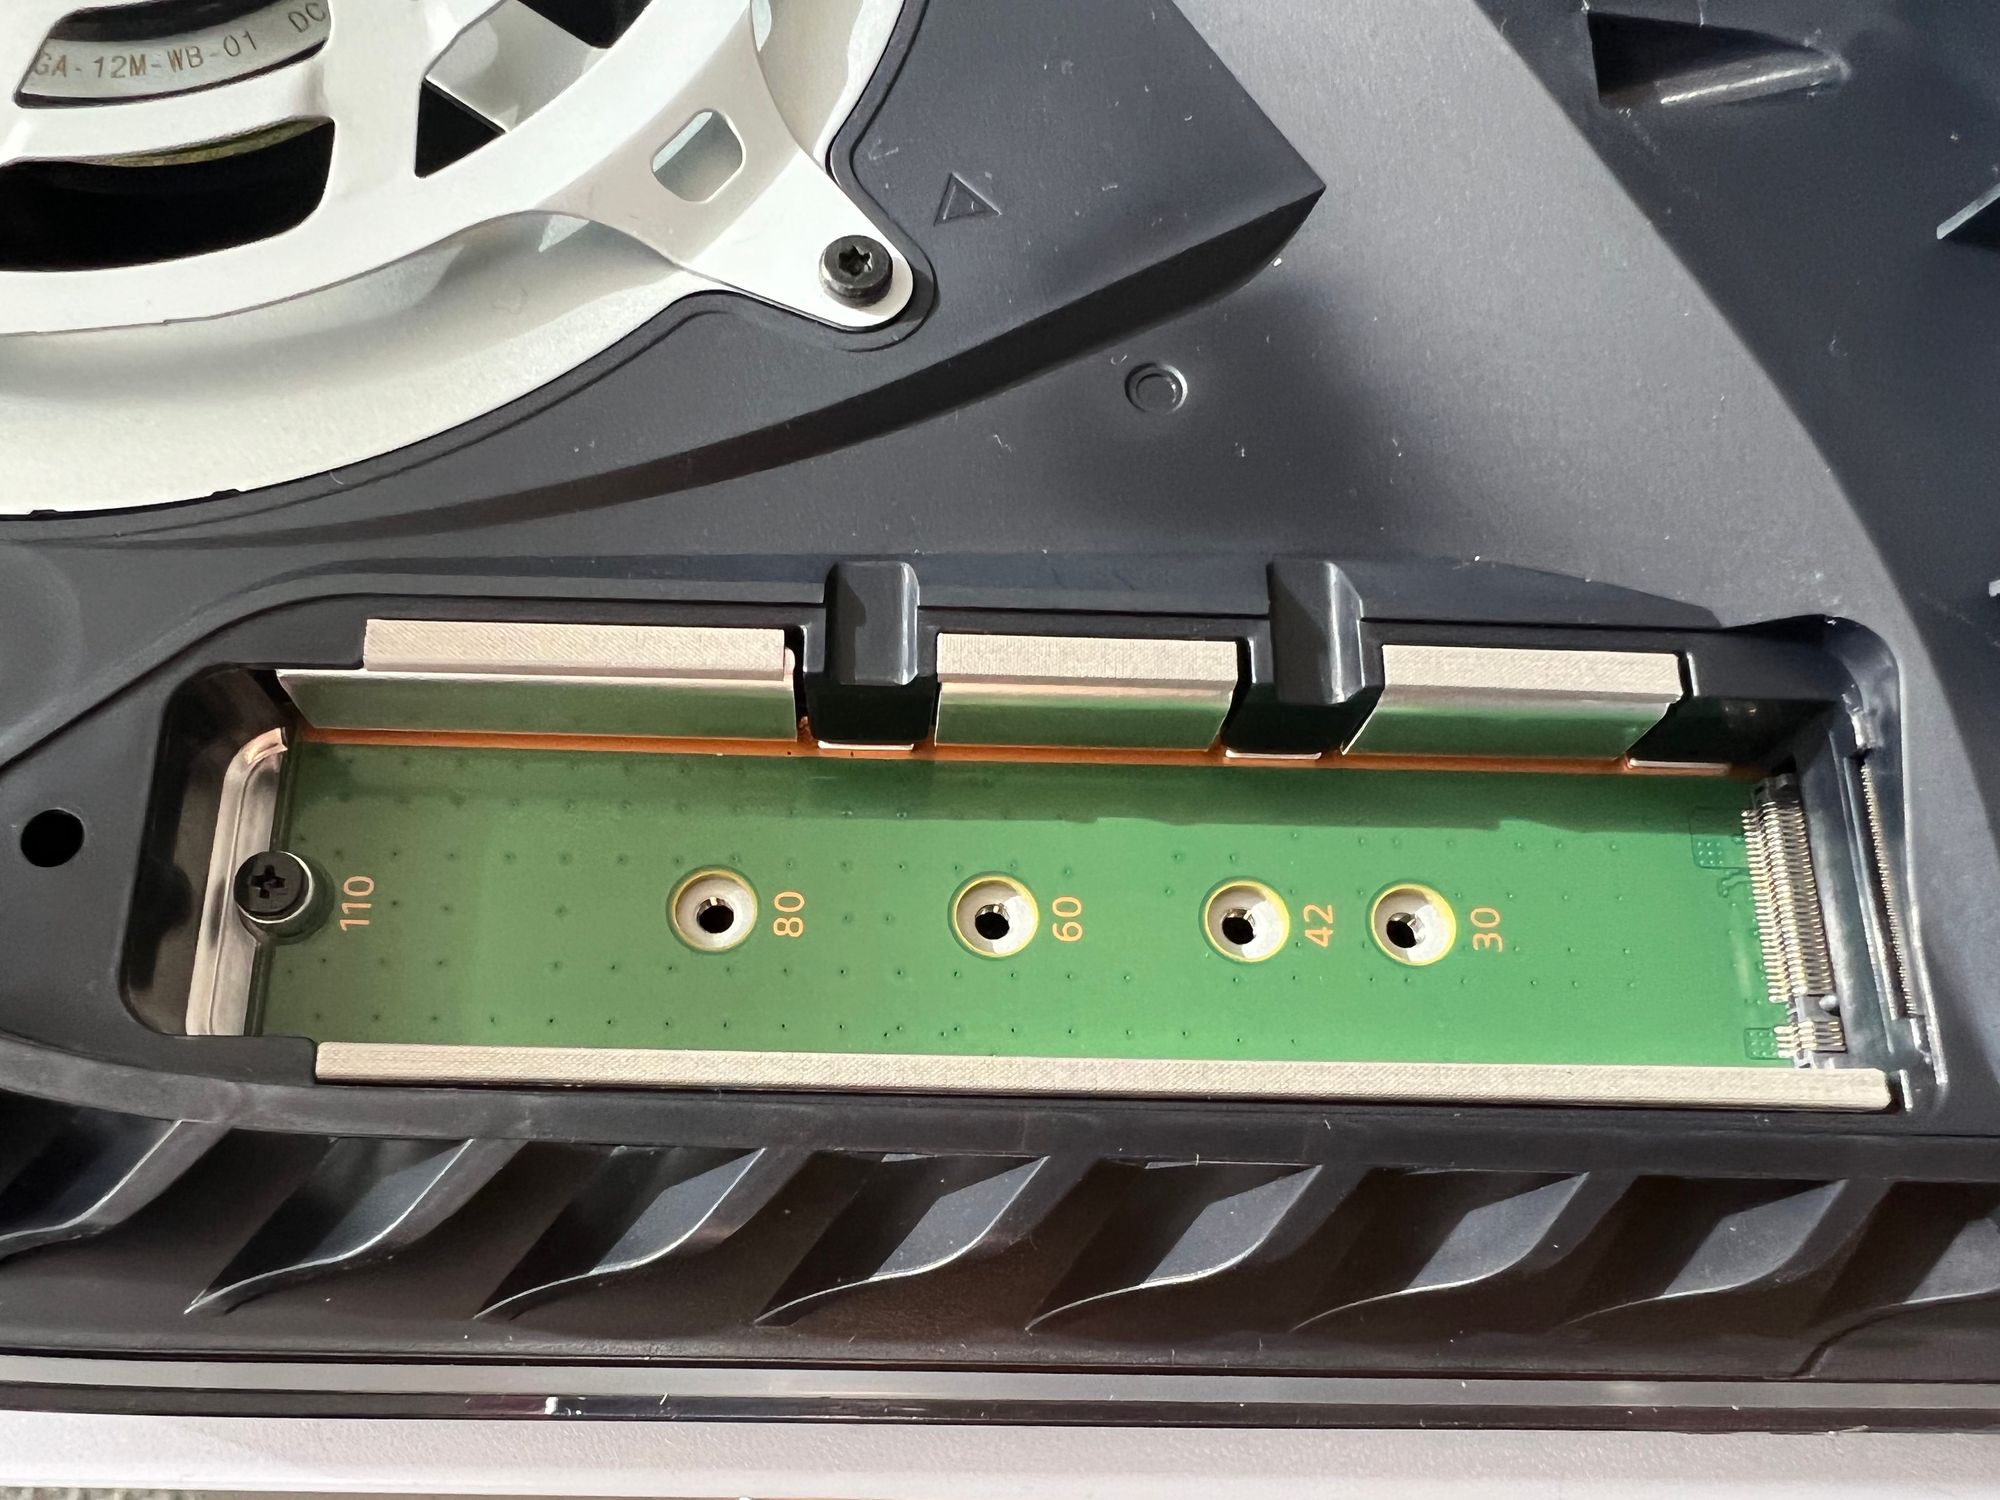 Under the expansion slot cover there is a little green well for the drive to be plugged in.